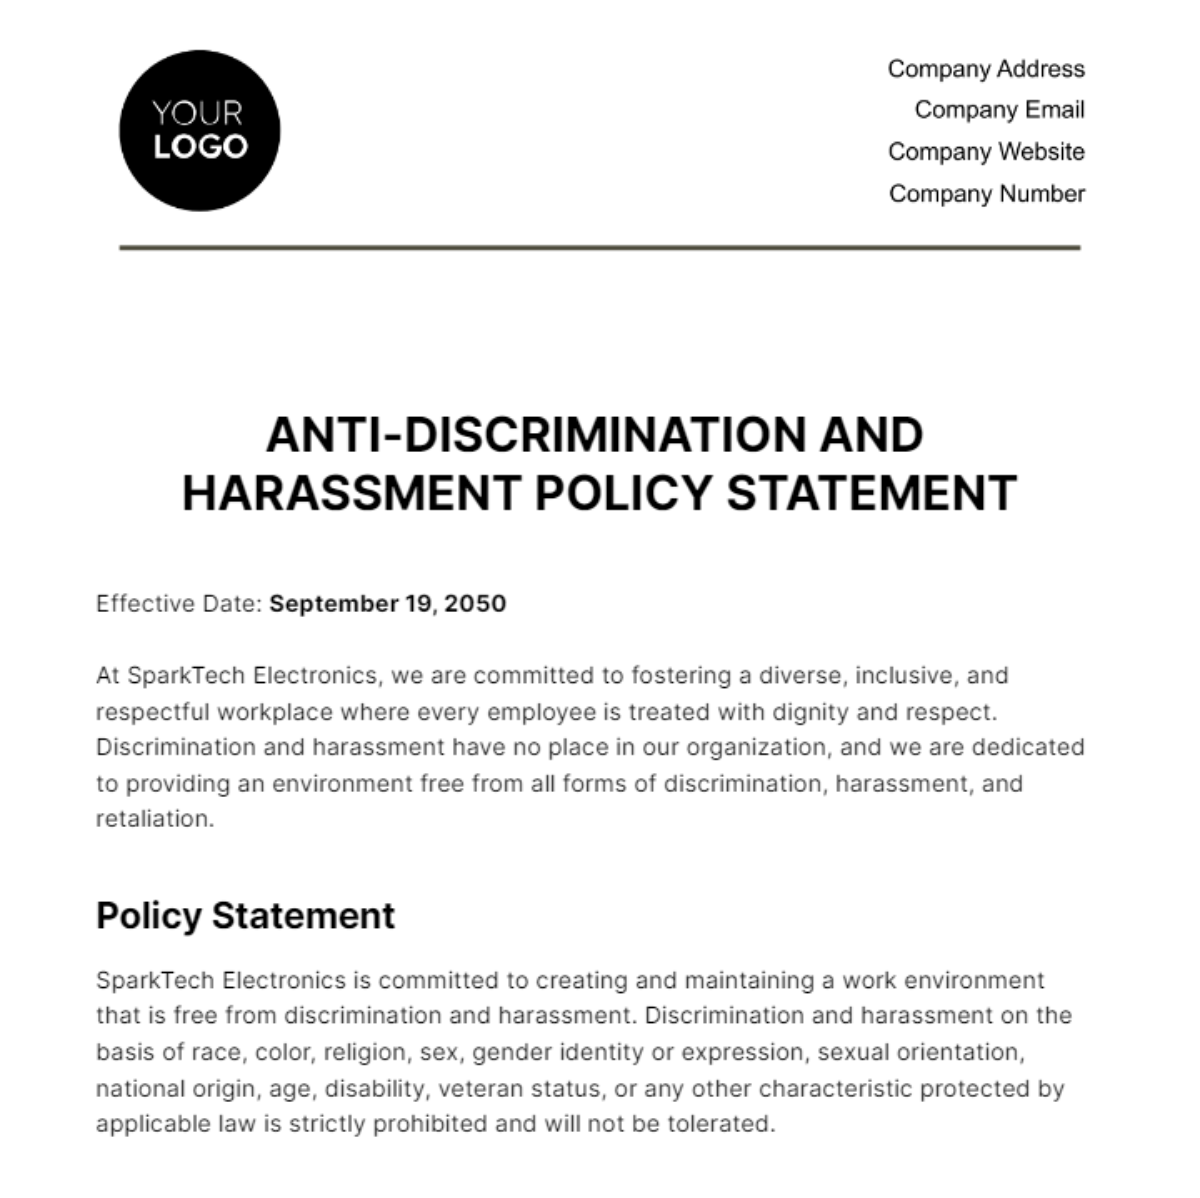 Free Anti-Discrimination and Harassment Policy Statement HR Template